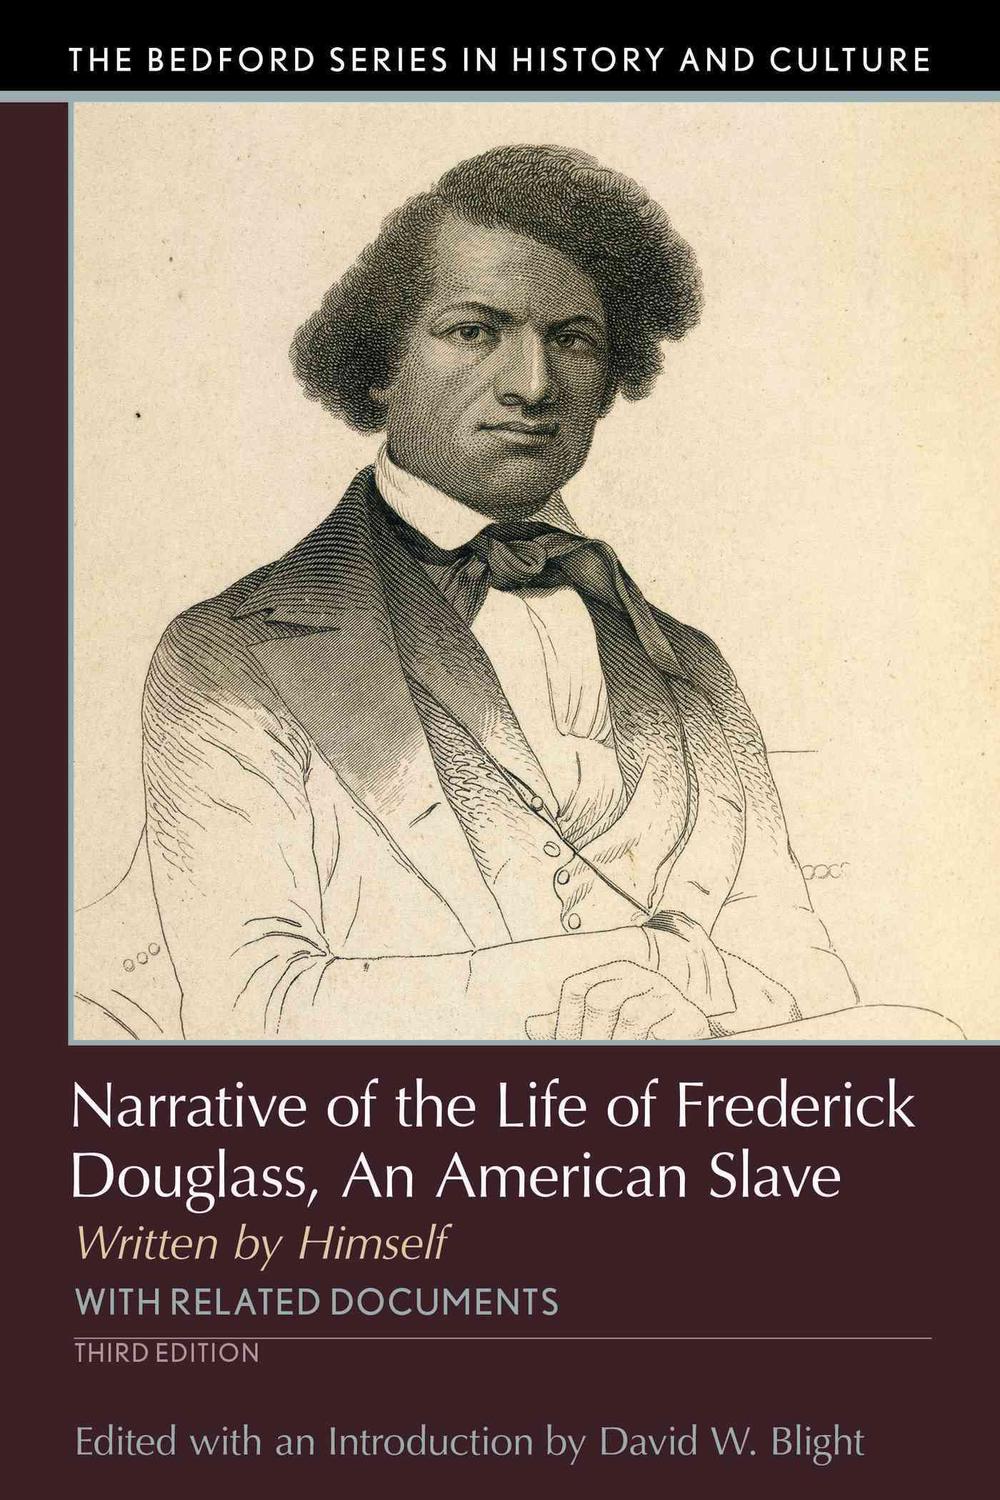 narrative of the life of frederick douglass book